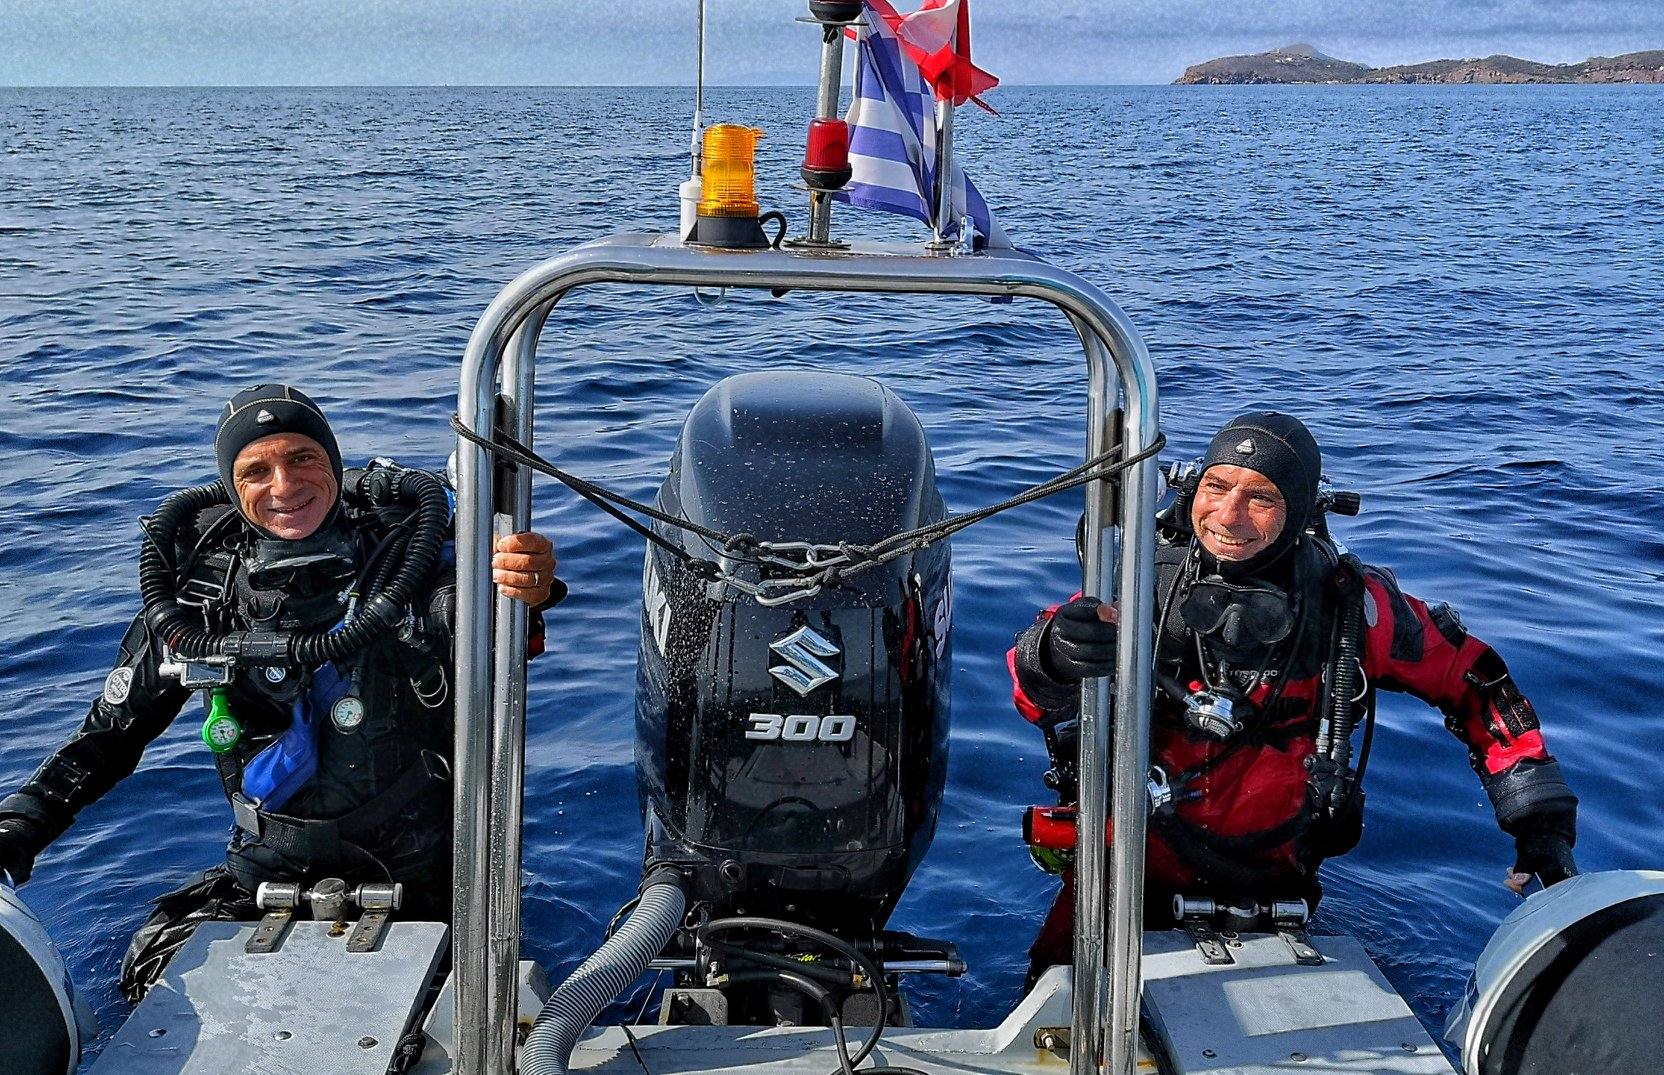 smiling tec Divers climbing the ladder back on the rib boat